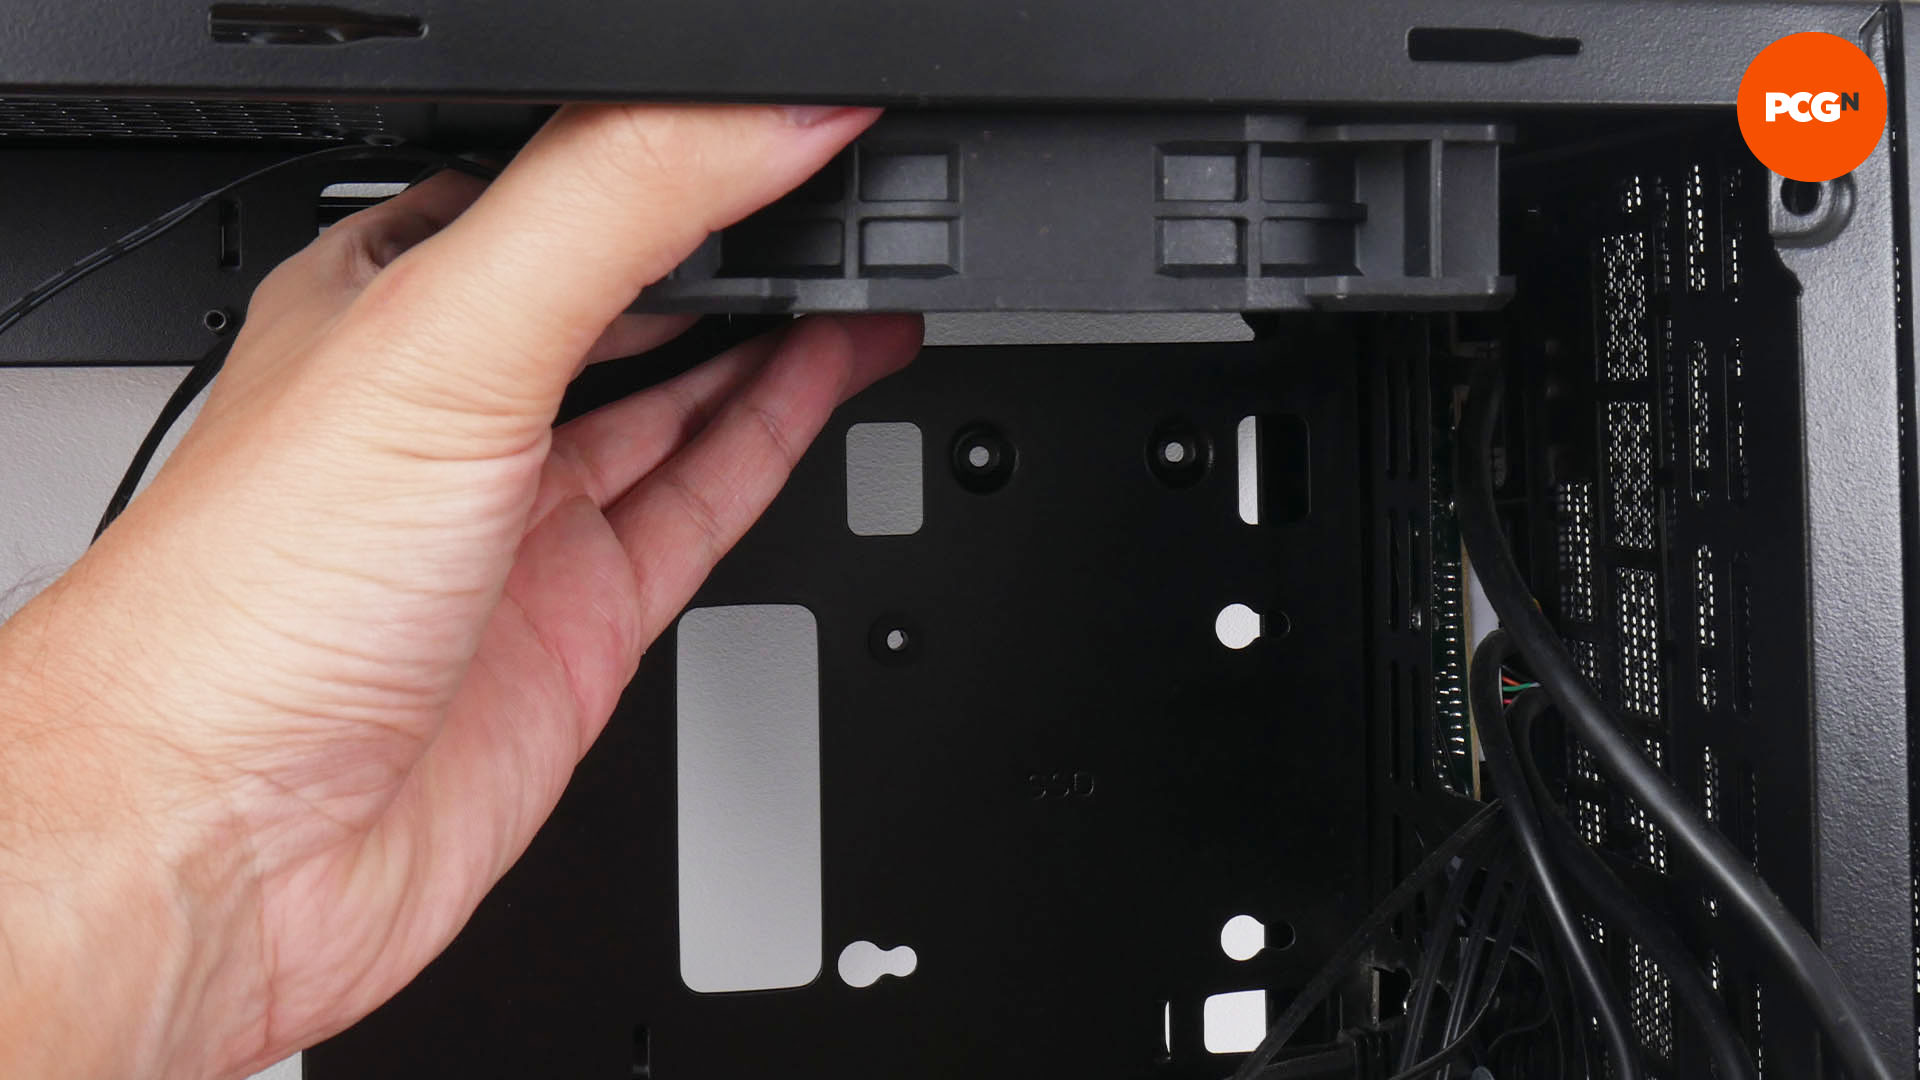 How to add fan mounts to your PC case: Check clearance